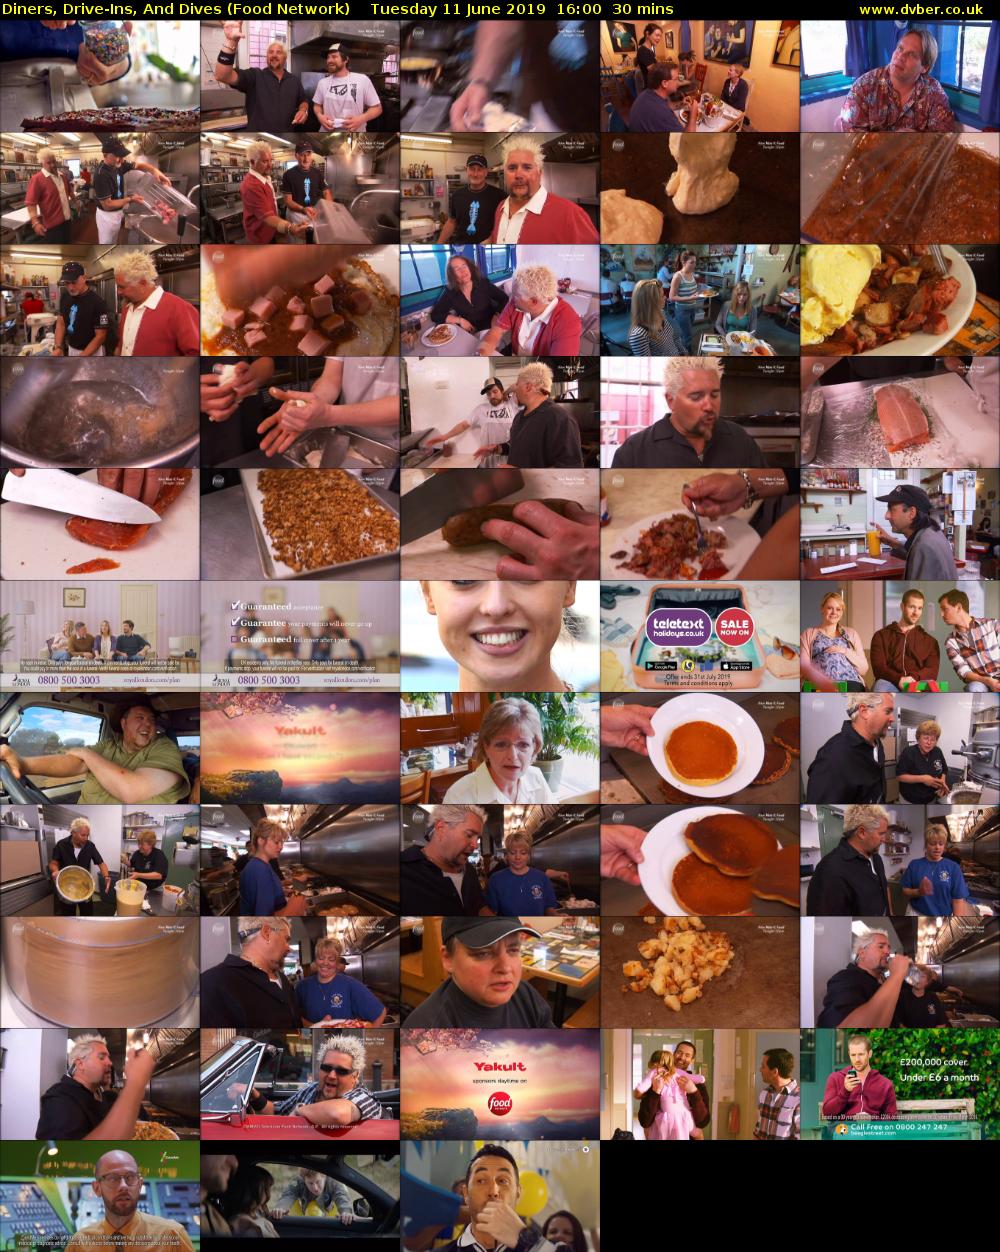 Diners, Drive-Ins, And Dives (Food Network) Tuesday 11 June 2019 16:00 - 16:30